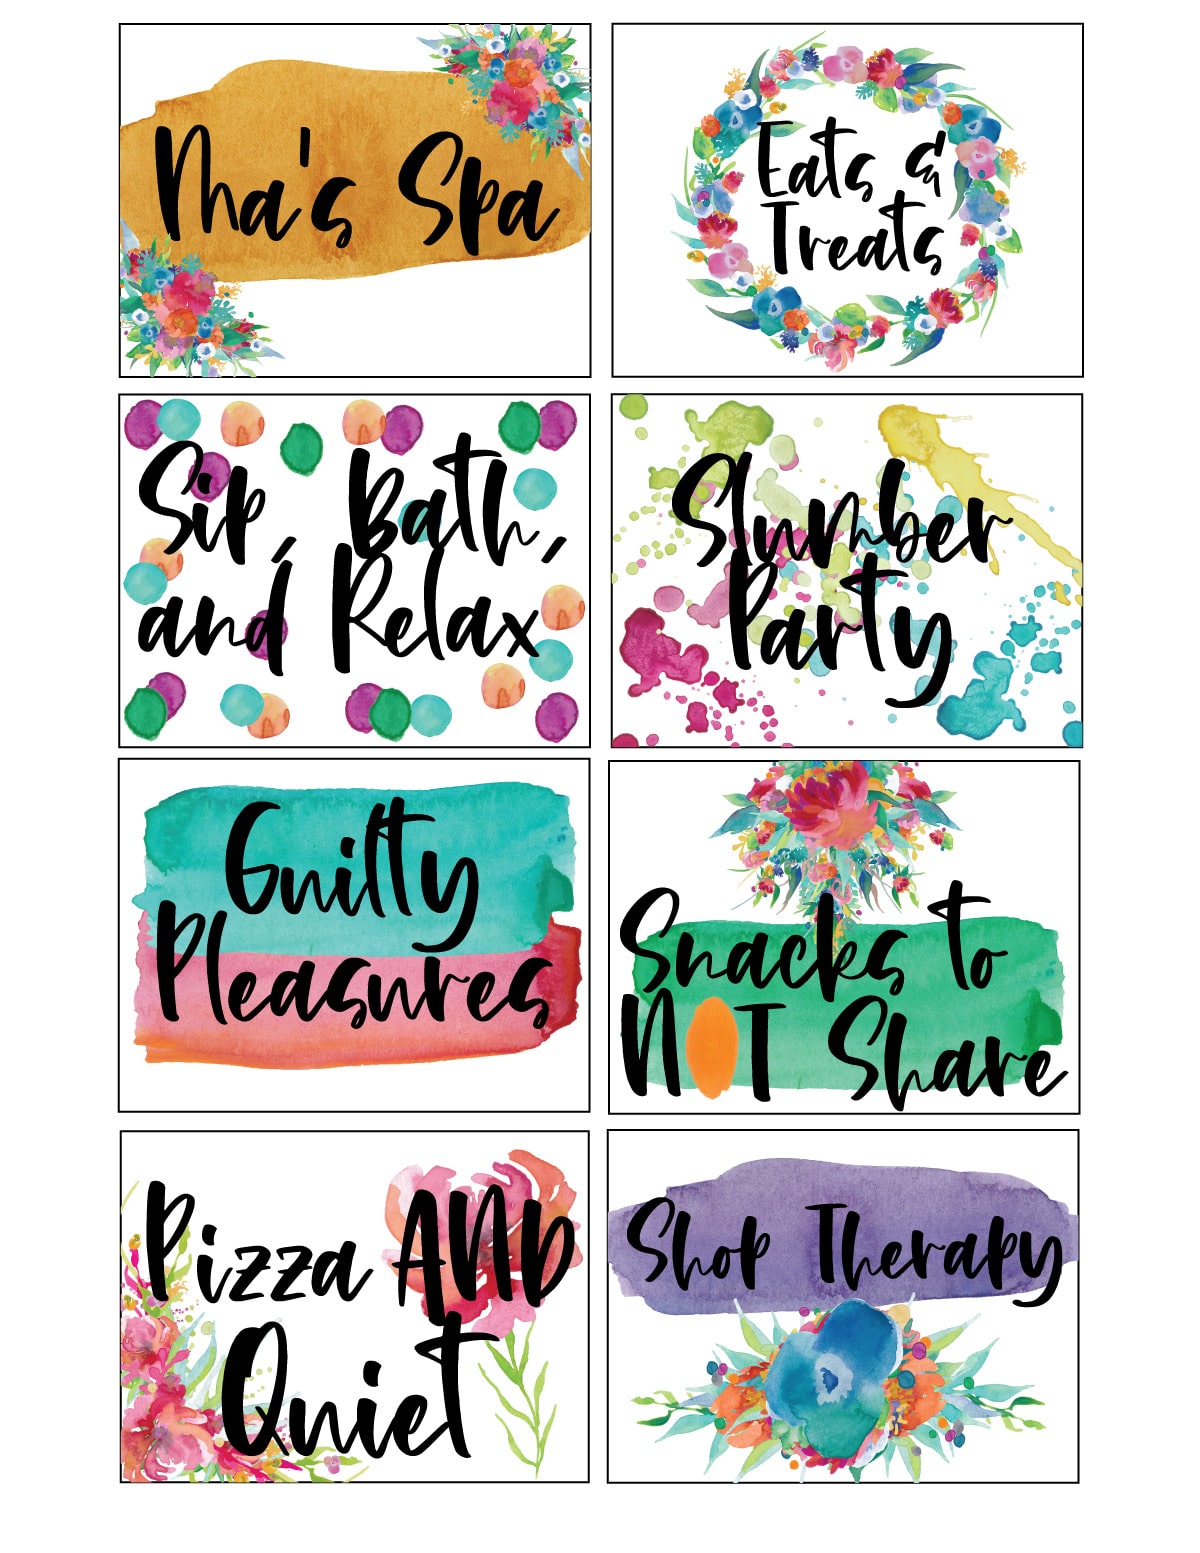 Labels for Mother's Day baskets